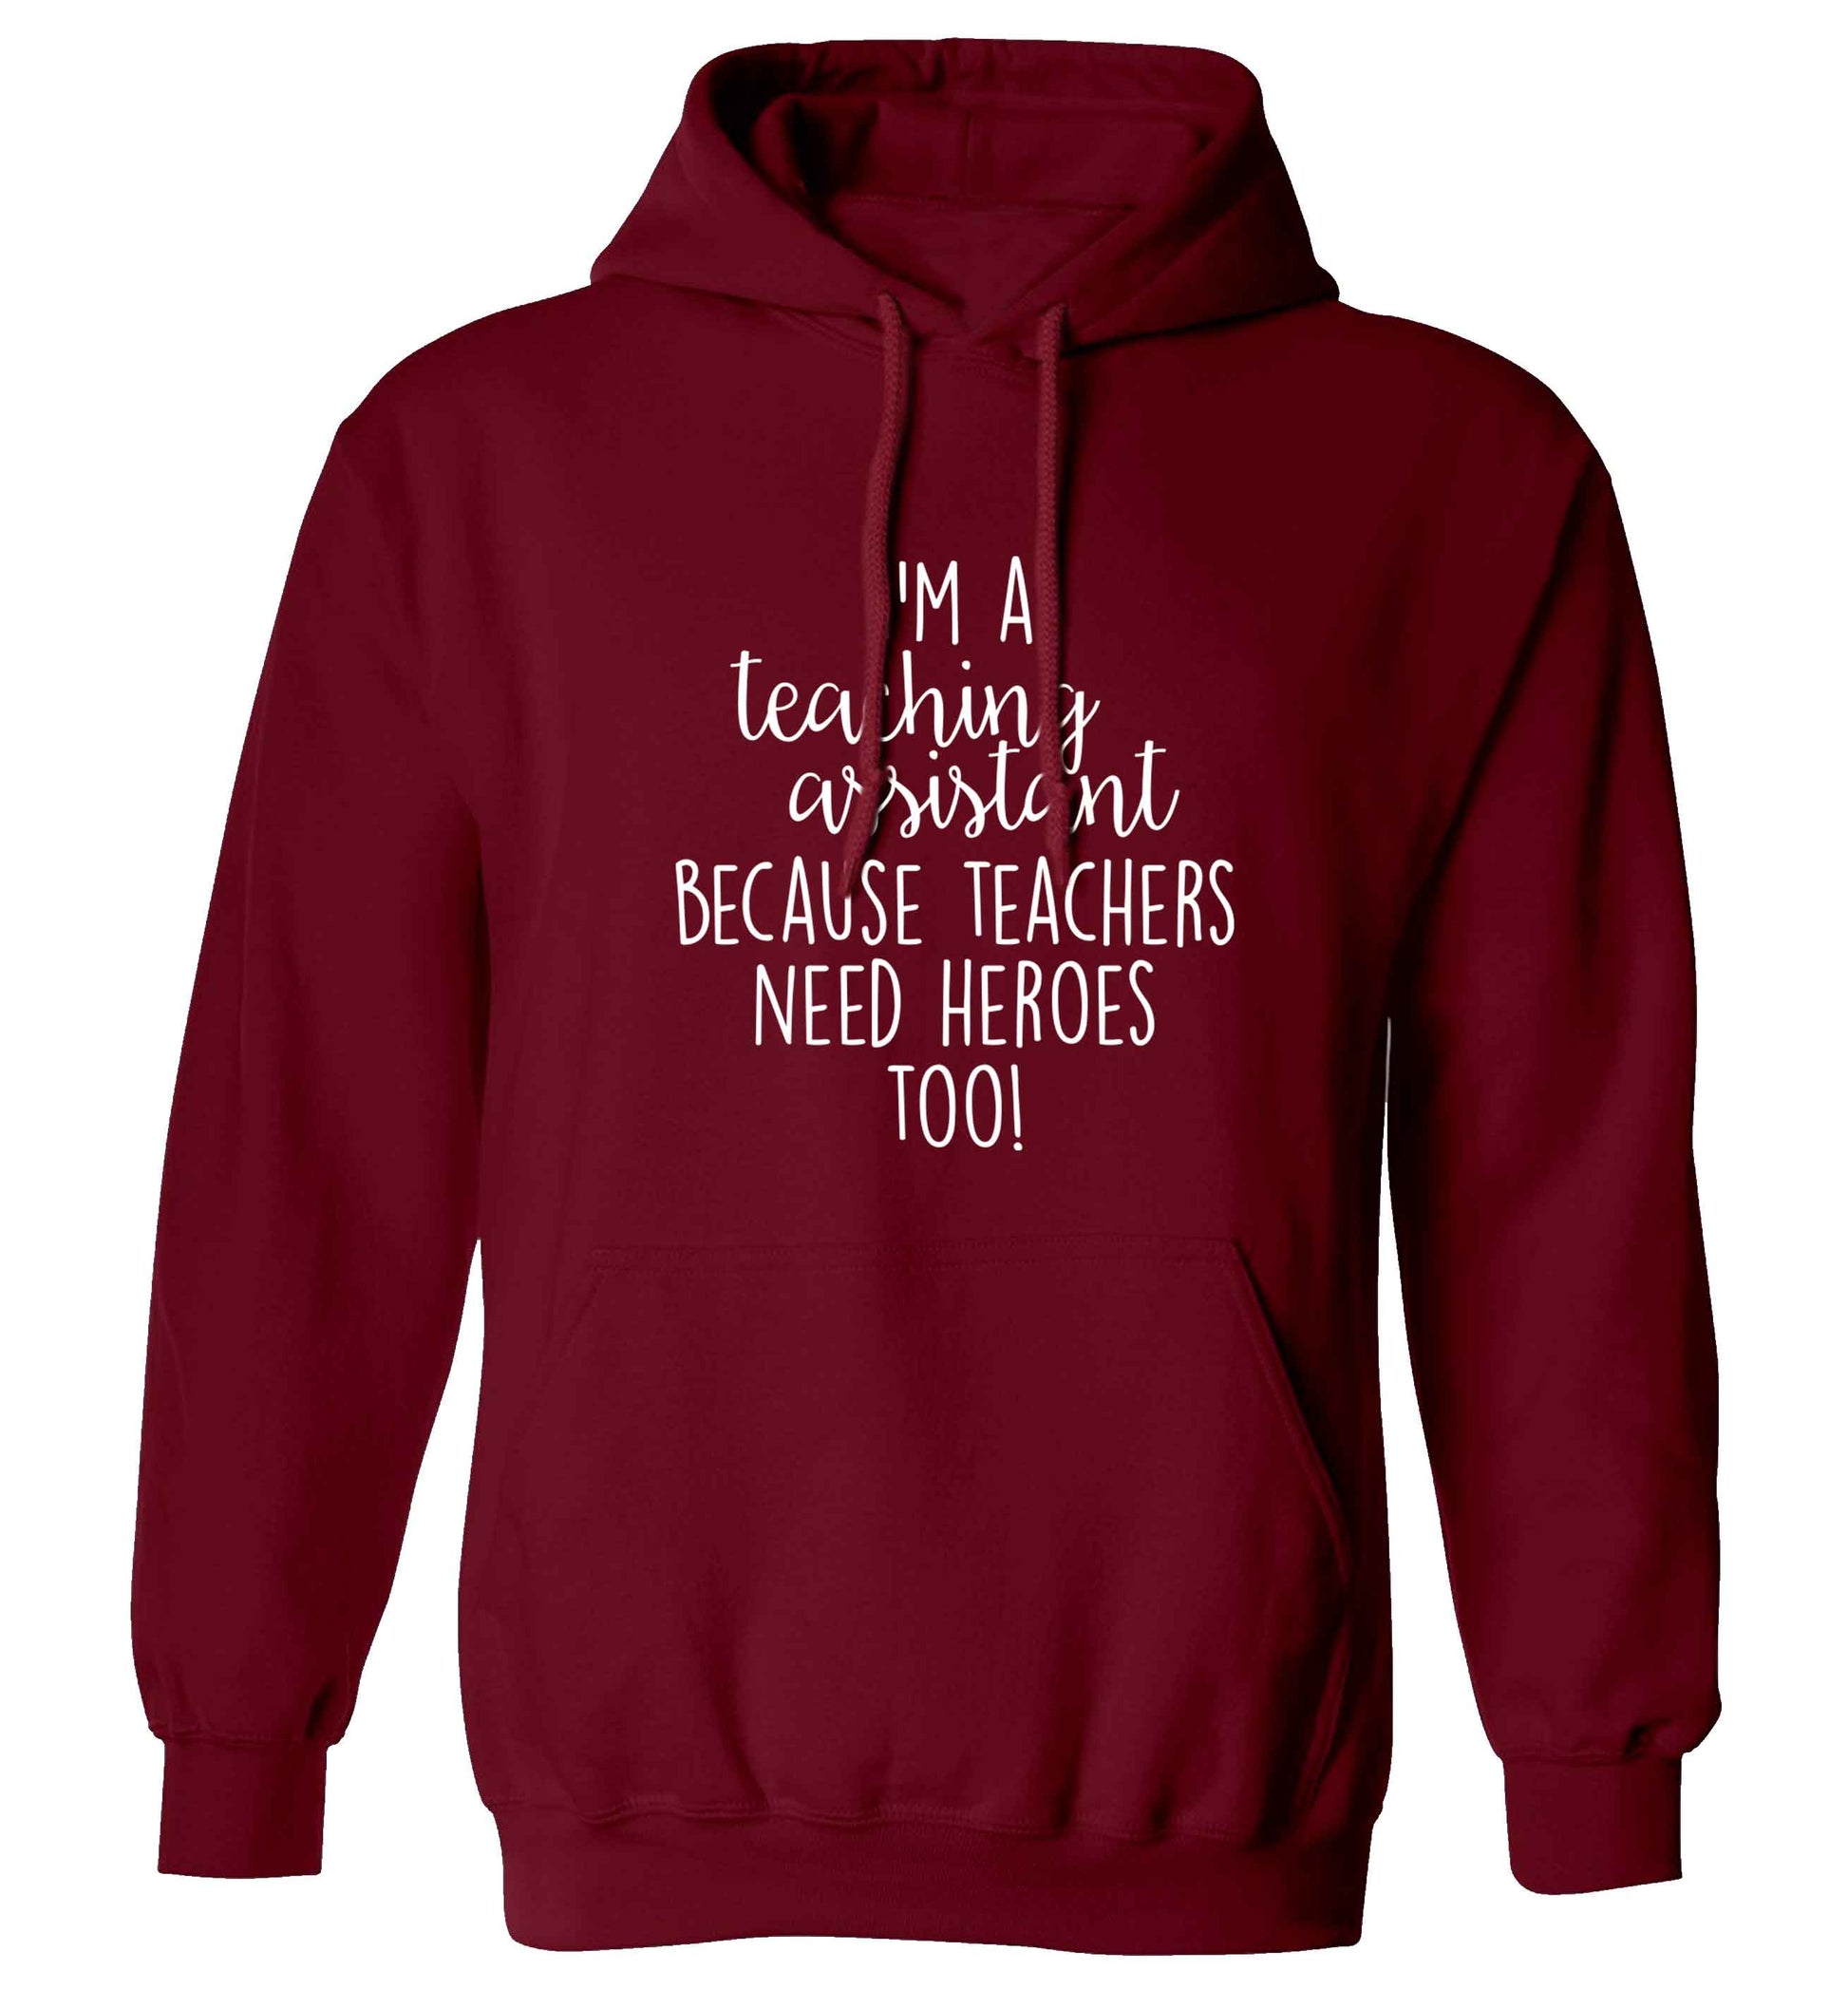 I'm a teaching assistant because teachers need heroes too! adults unisex maroon hoodie 2XL